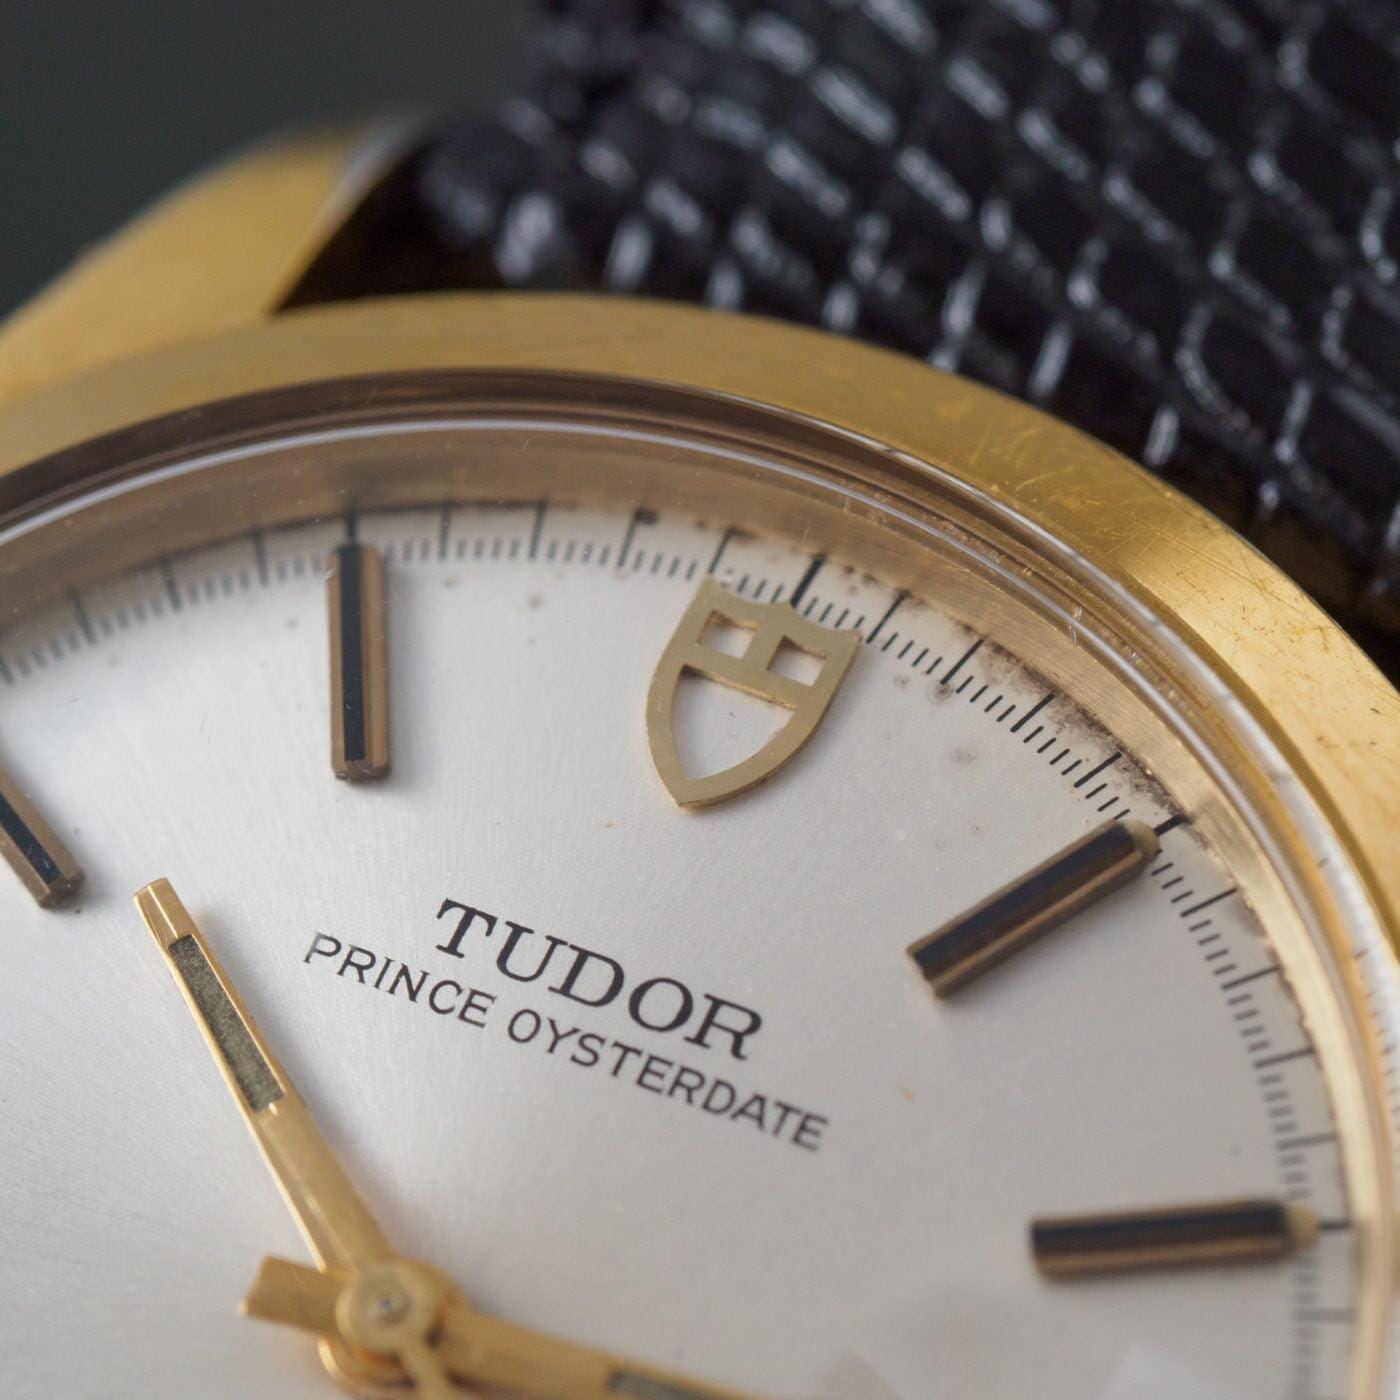 TUODR Price Oyster Date 9050/1